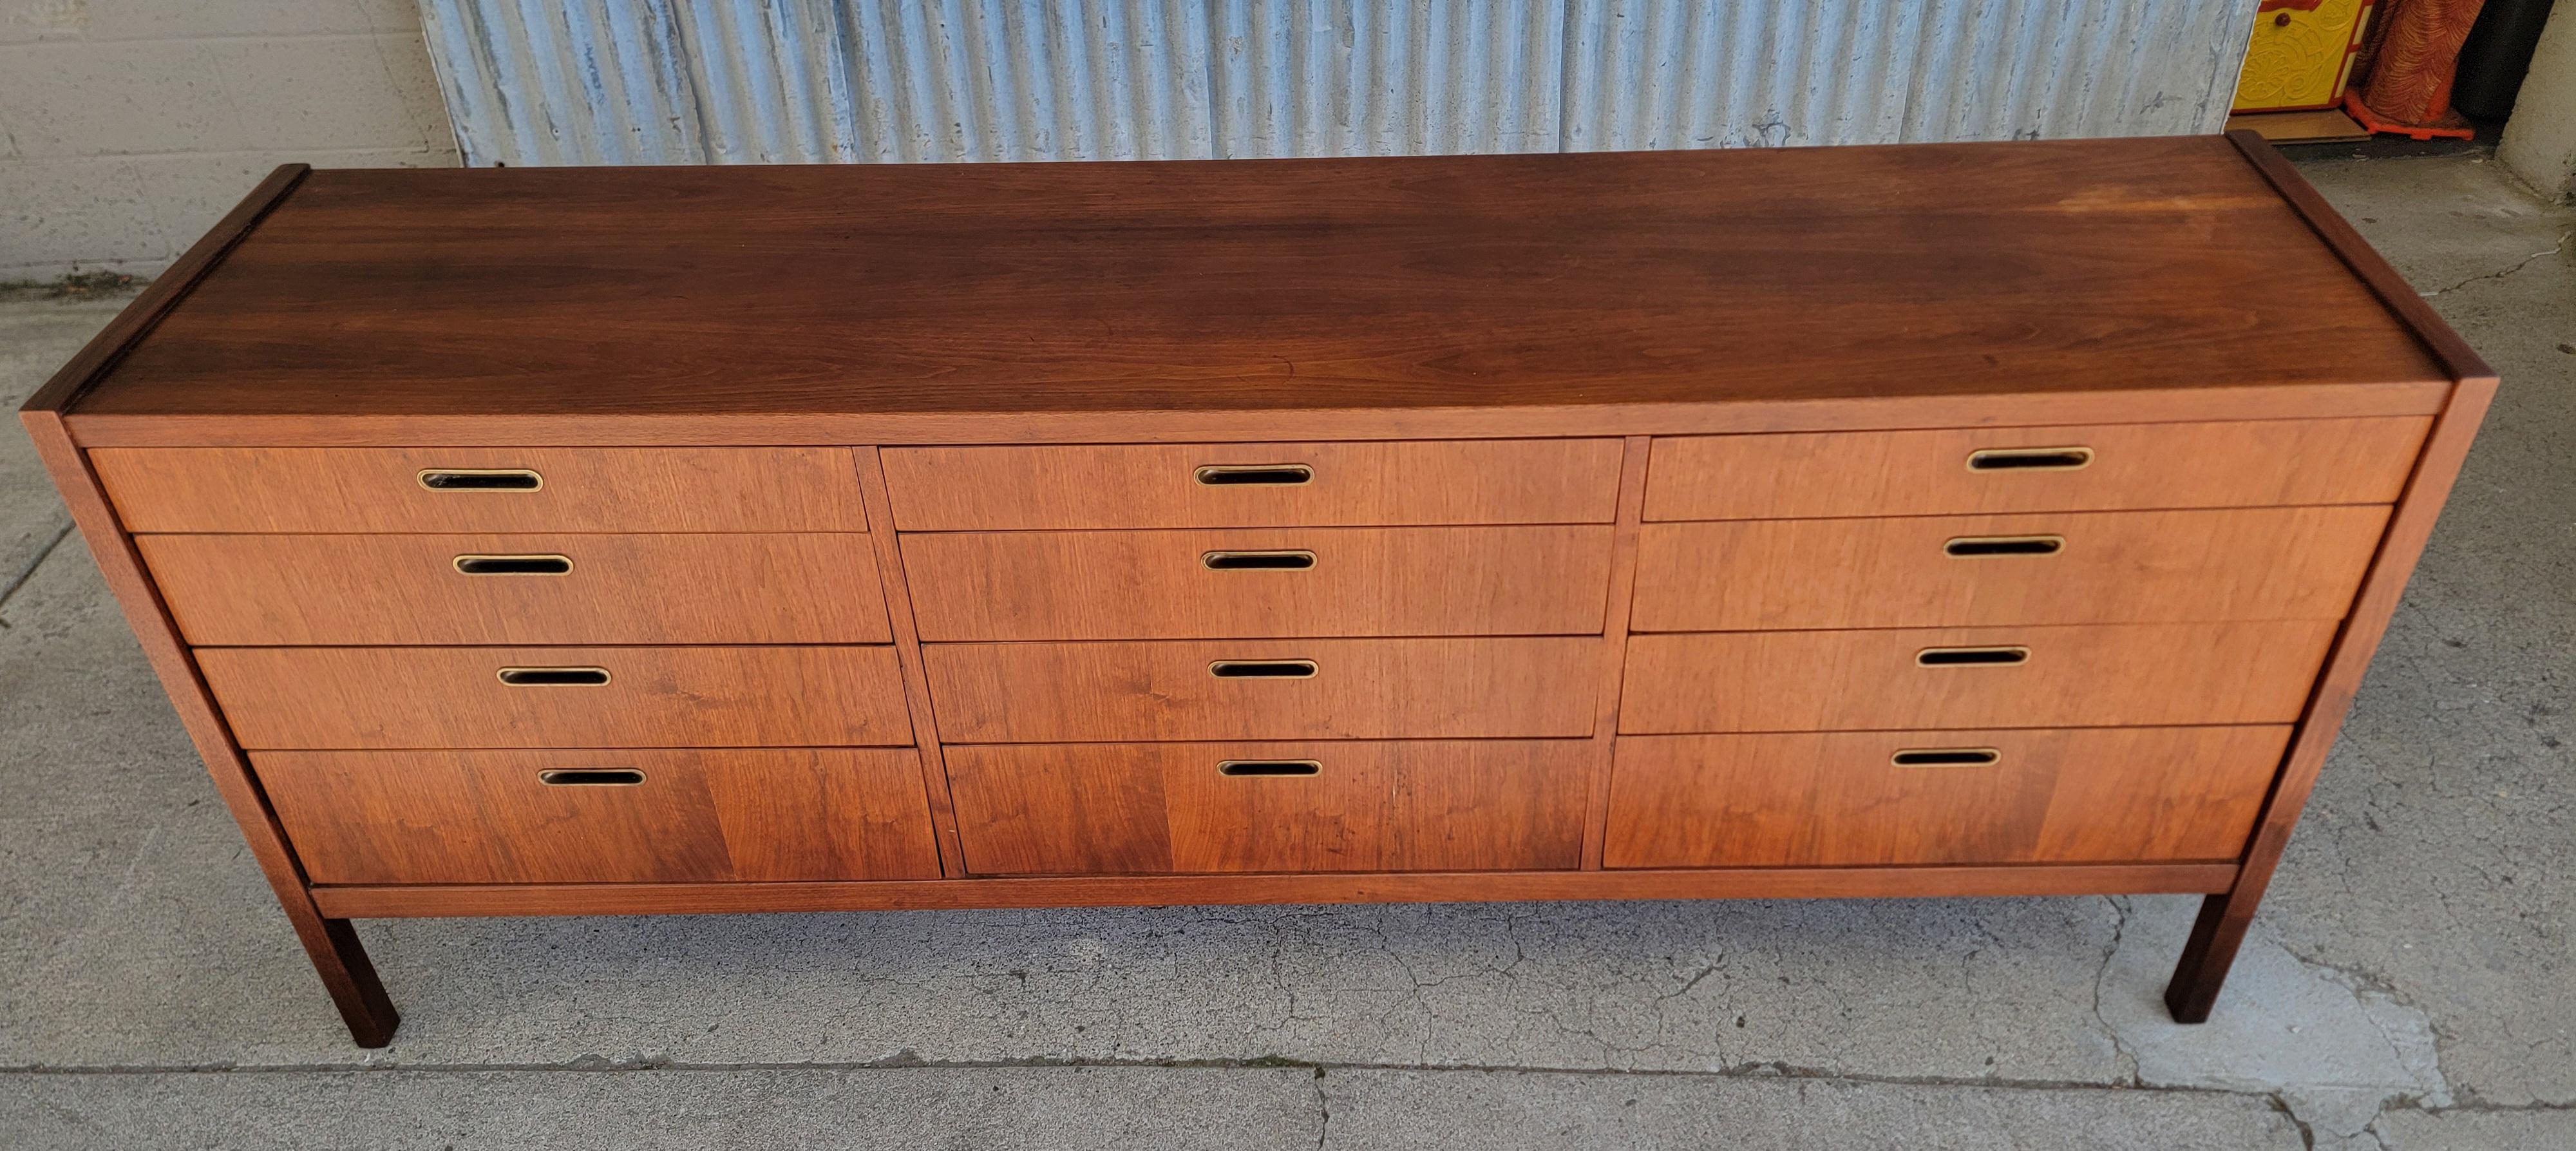 An oversized low Mid-Century Modern walnut dresser with 12 drawers. Fine craftsmanship and materials. Solid oak interior wood with dovetail construct at front and back of drawers. Dust panels between drawers and wooden center glide track. Drawers